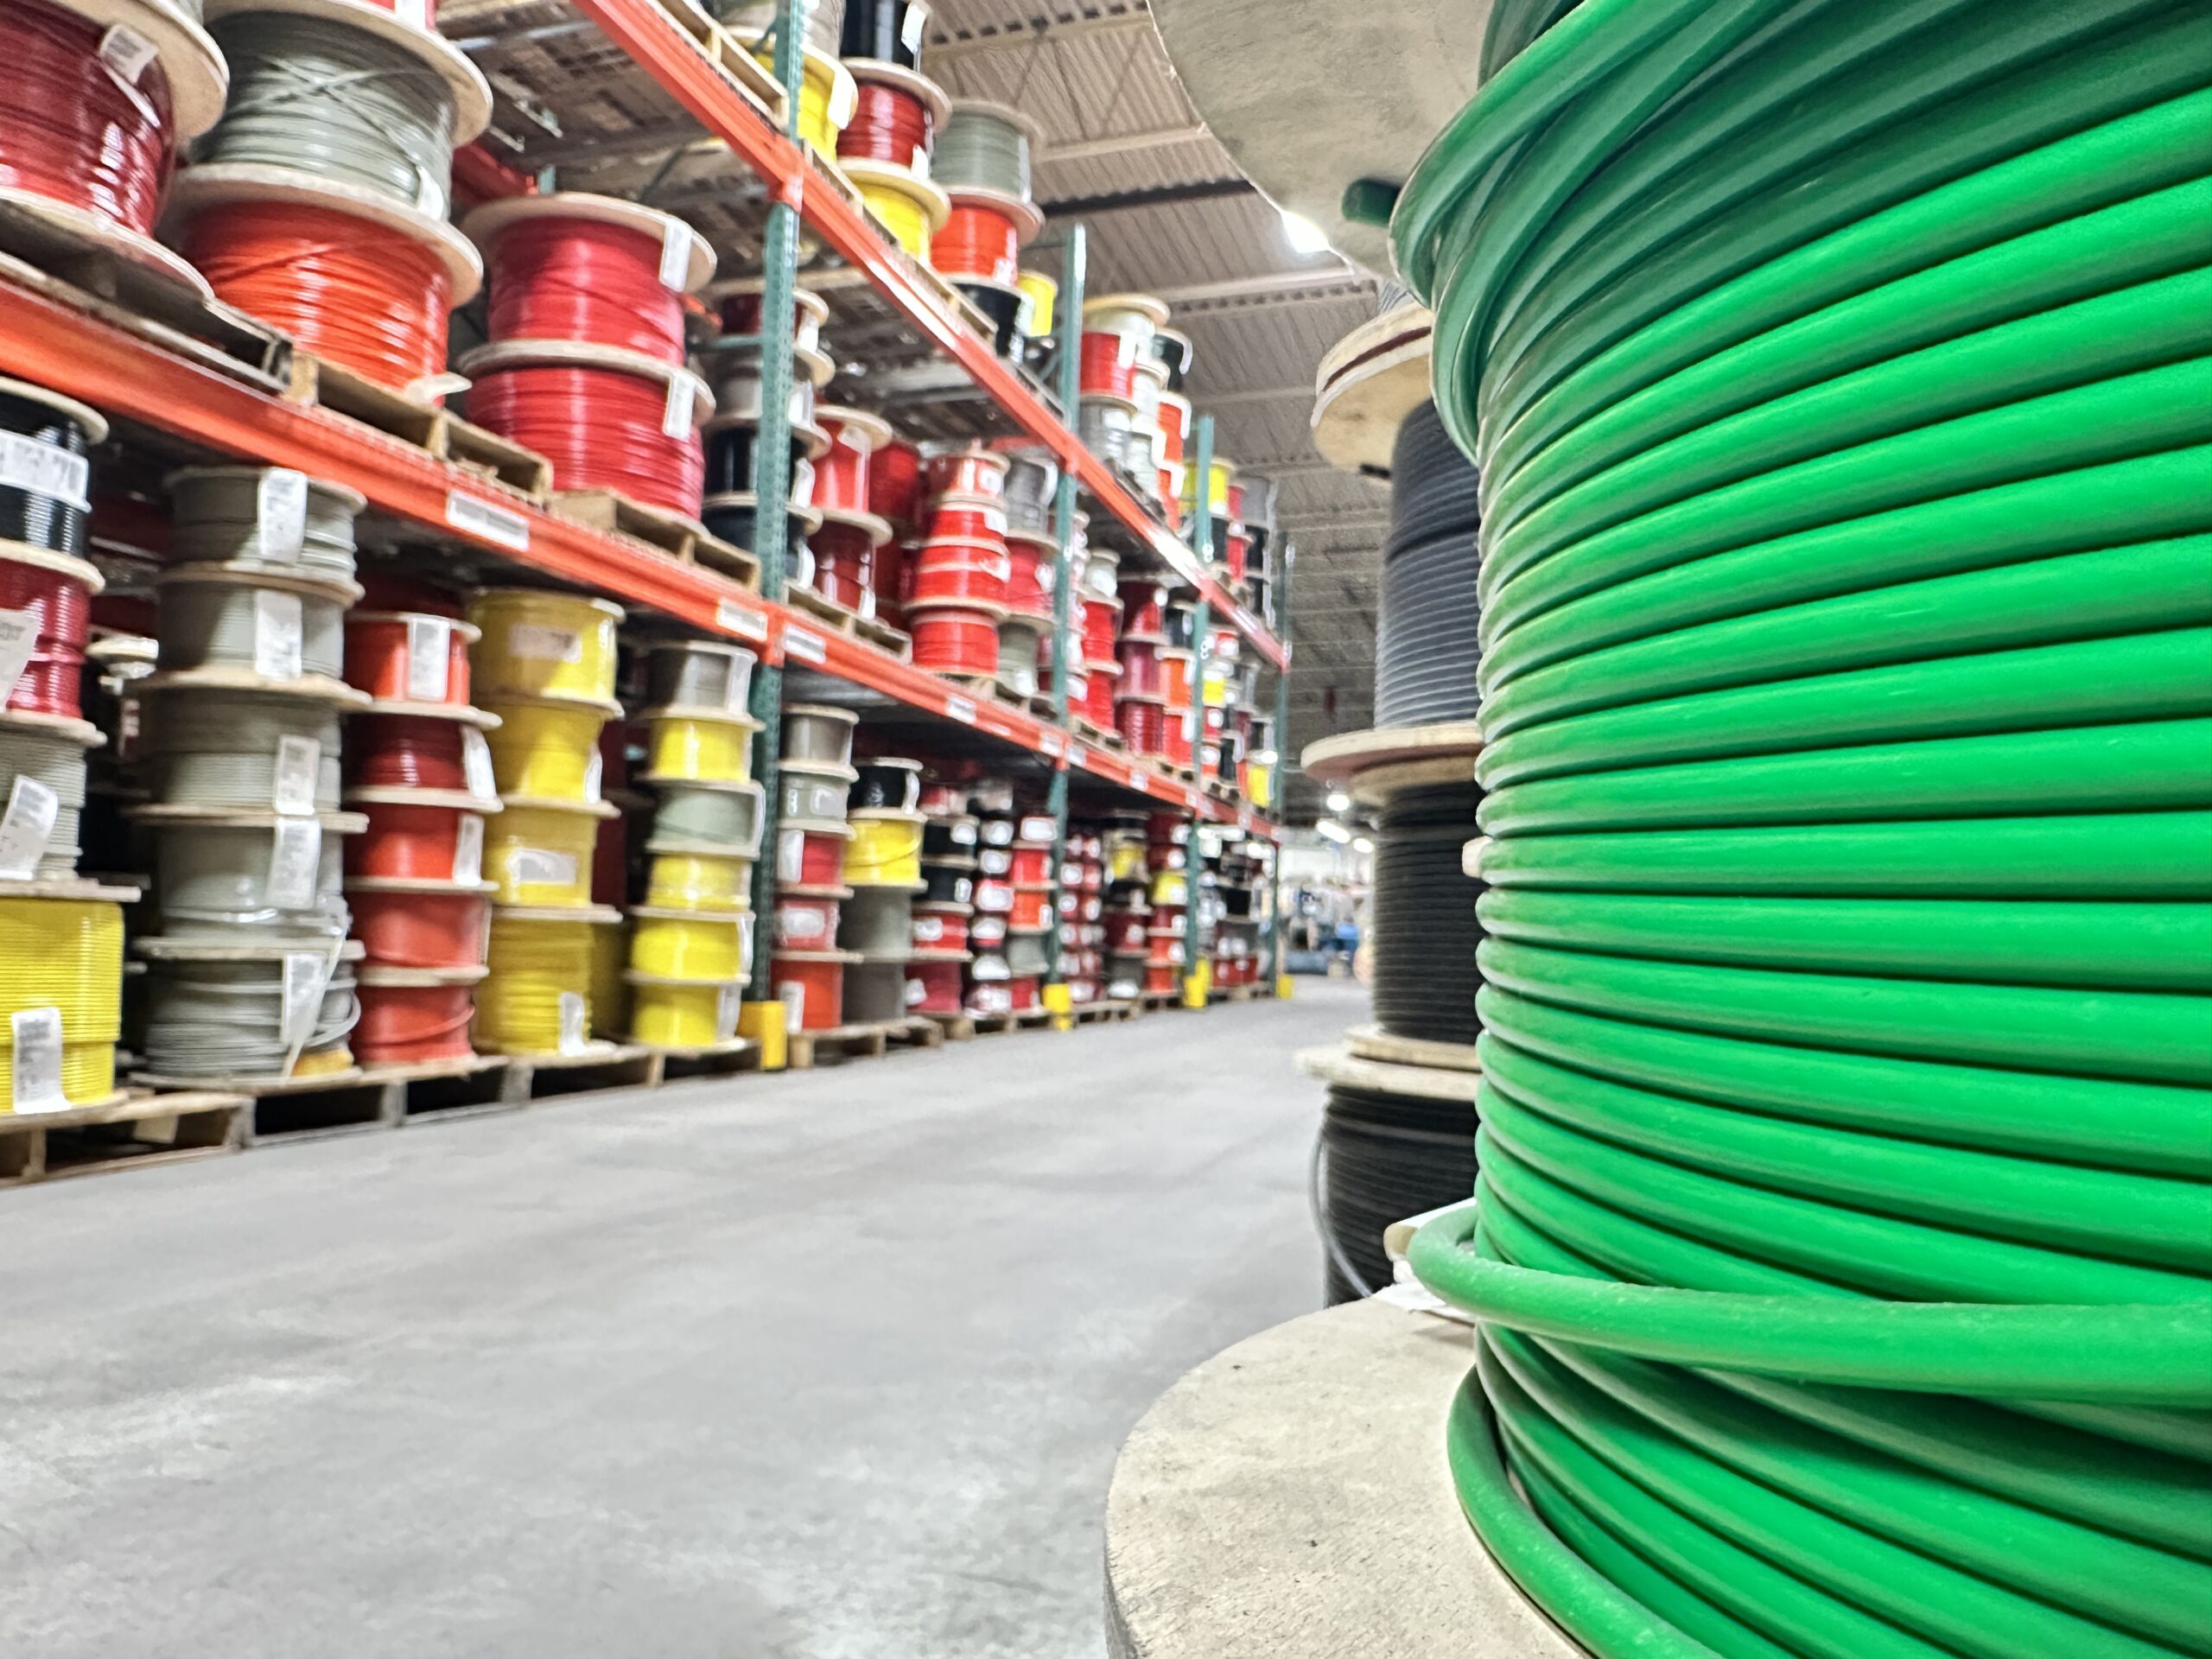 Coated cable spools in large warehouse